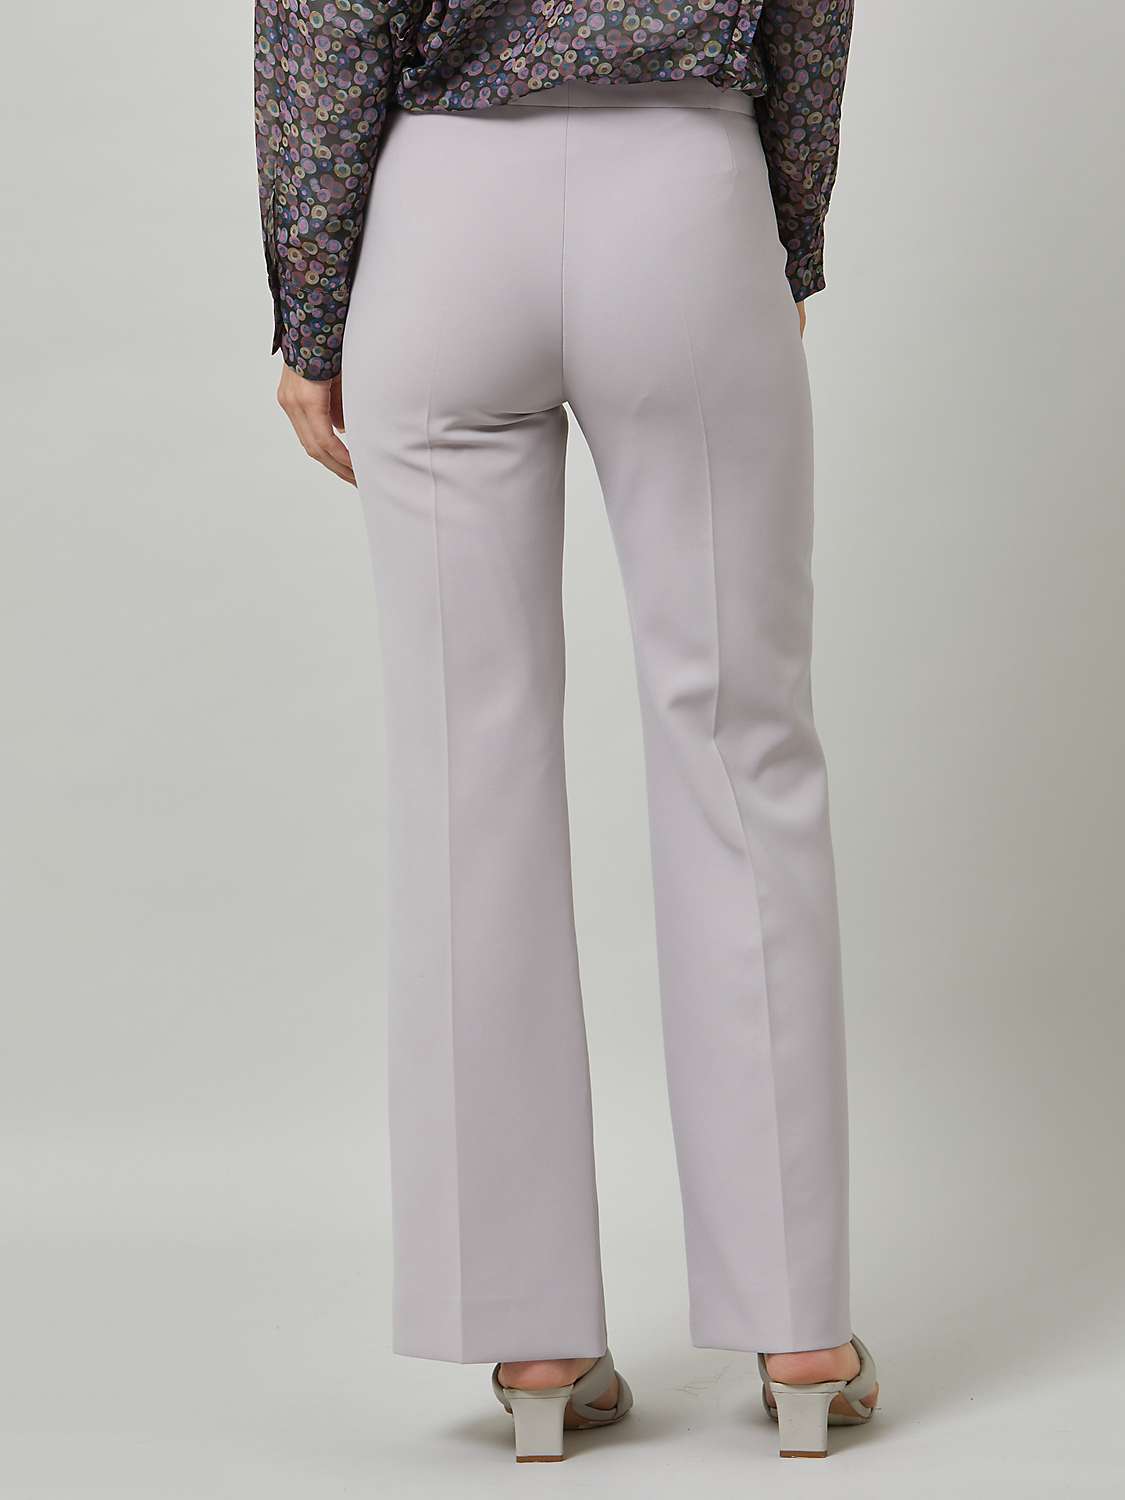 Buy Helen McAlinden Kelly Flared Trousers, Champagne Online at johnlewis.com